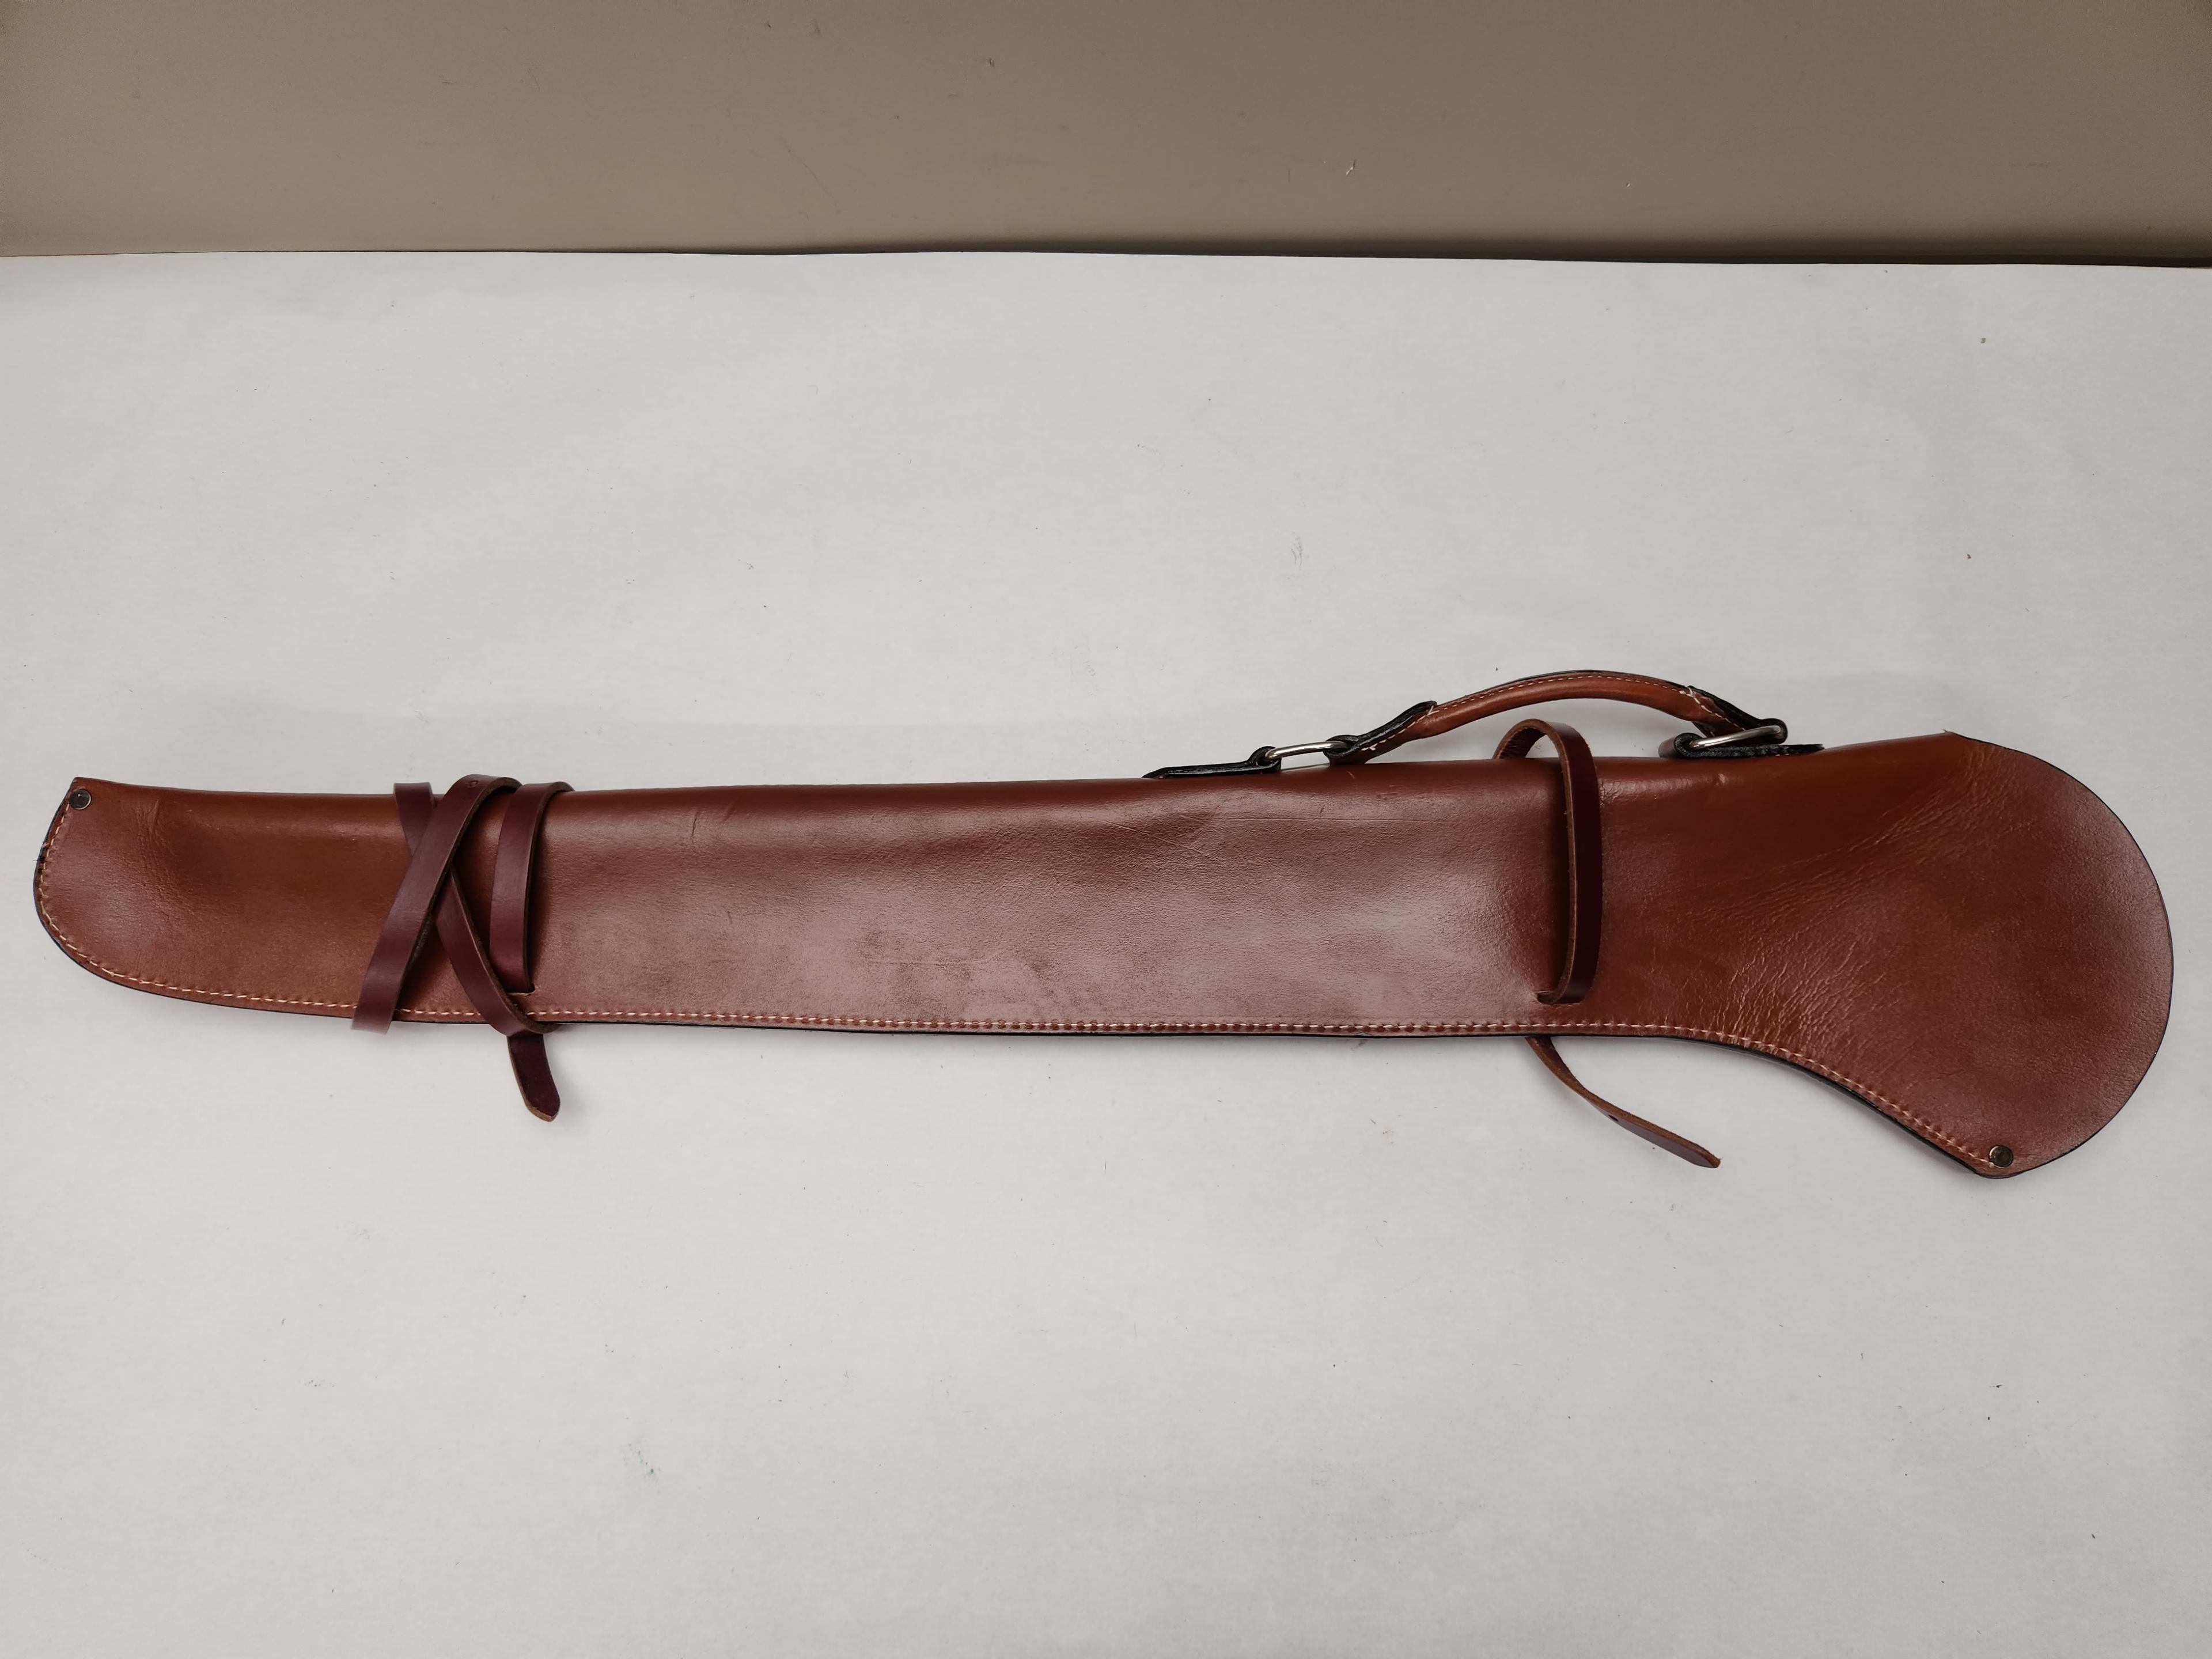 40" LEATHER RIFLE SCABBARD